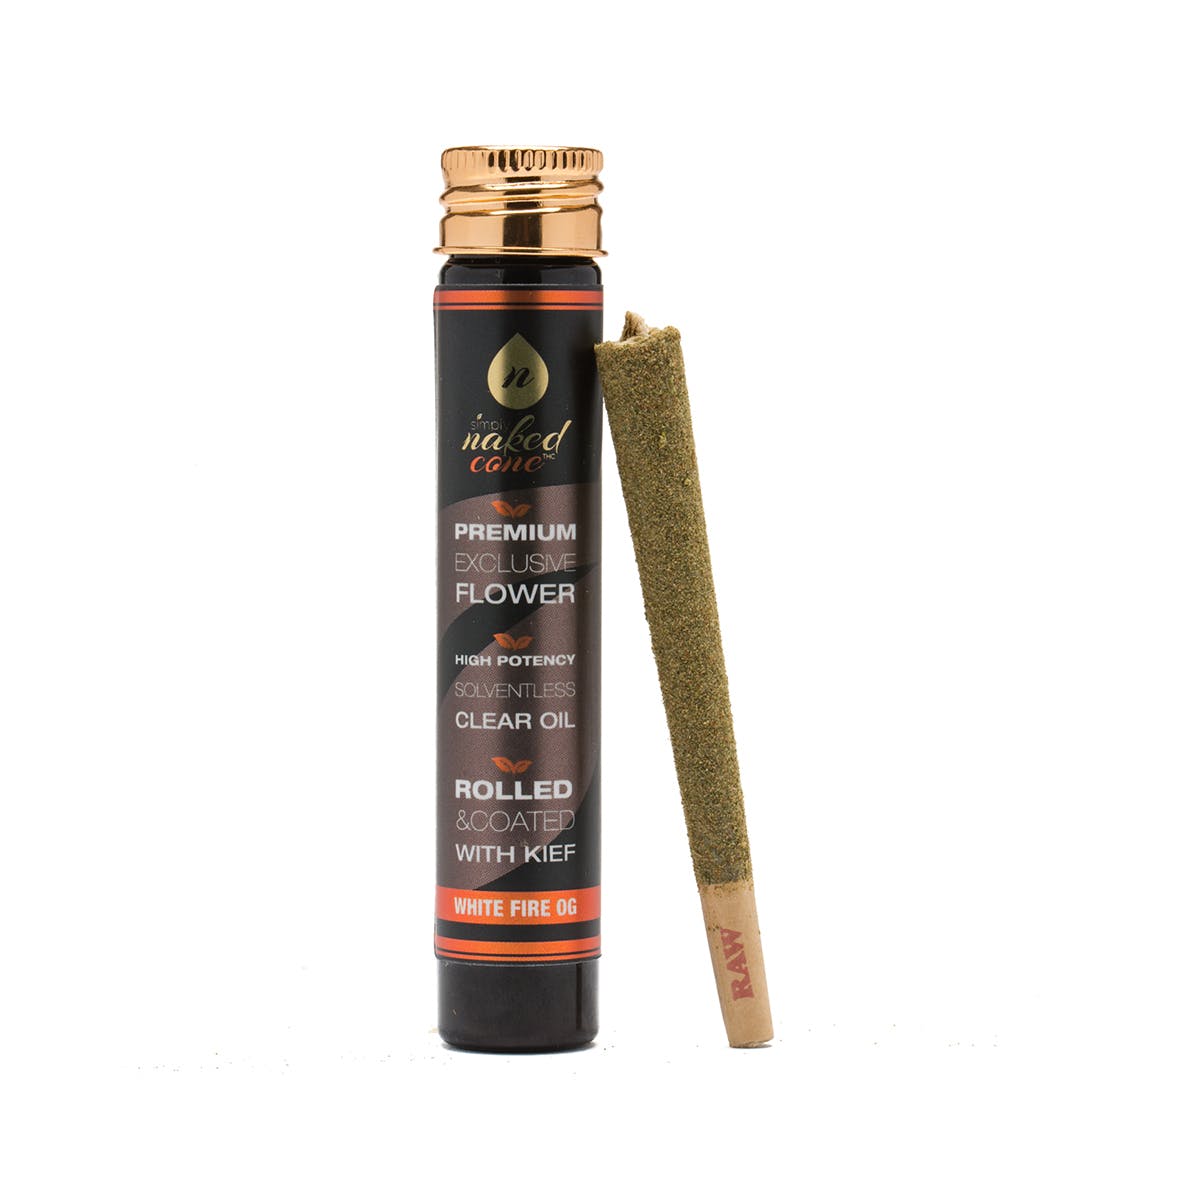 marijuana-dispensaries-west-coast-collective-in-los-angeles-white-fire-og-simply-naked-cone